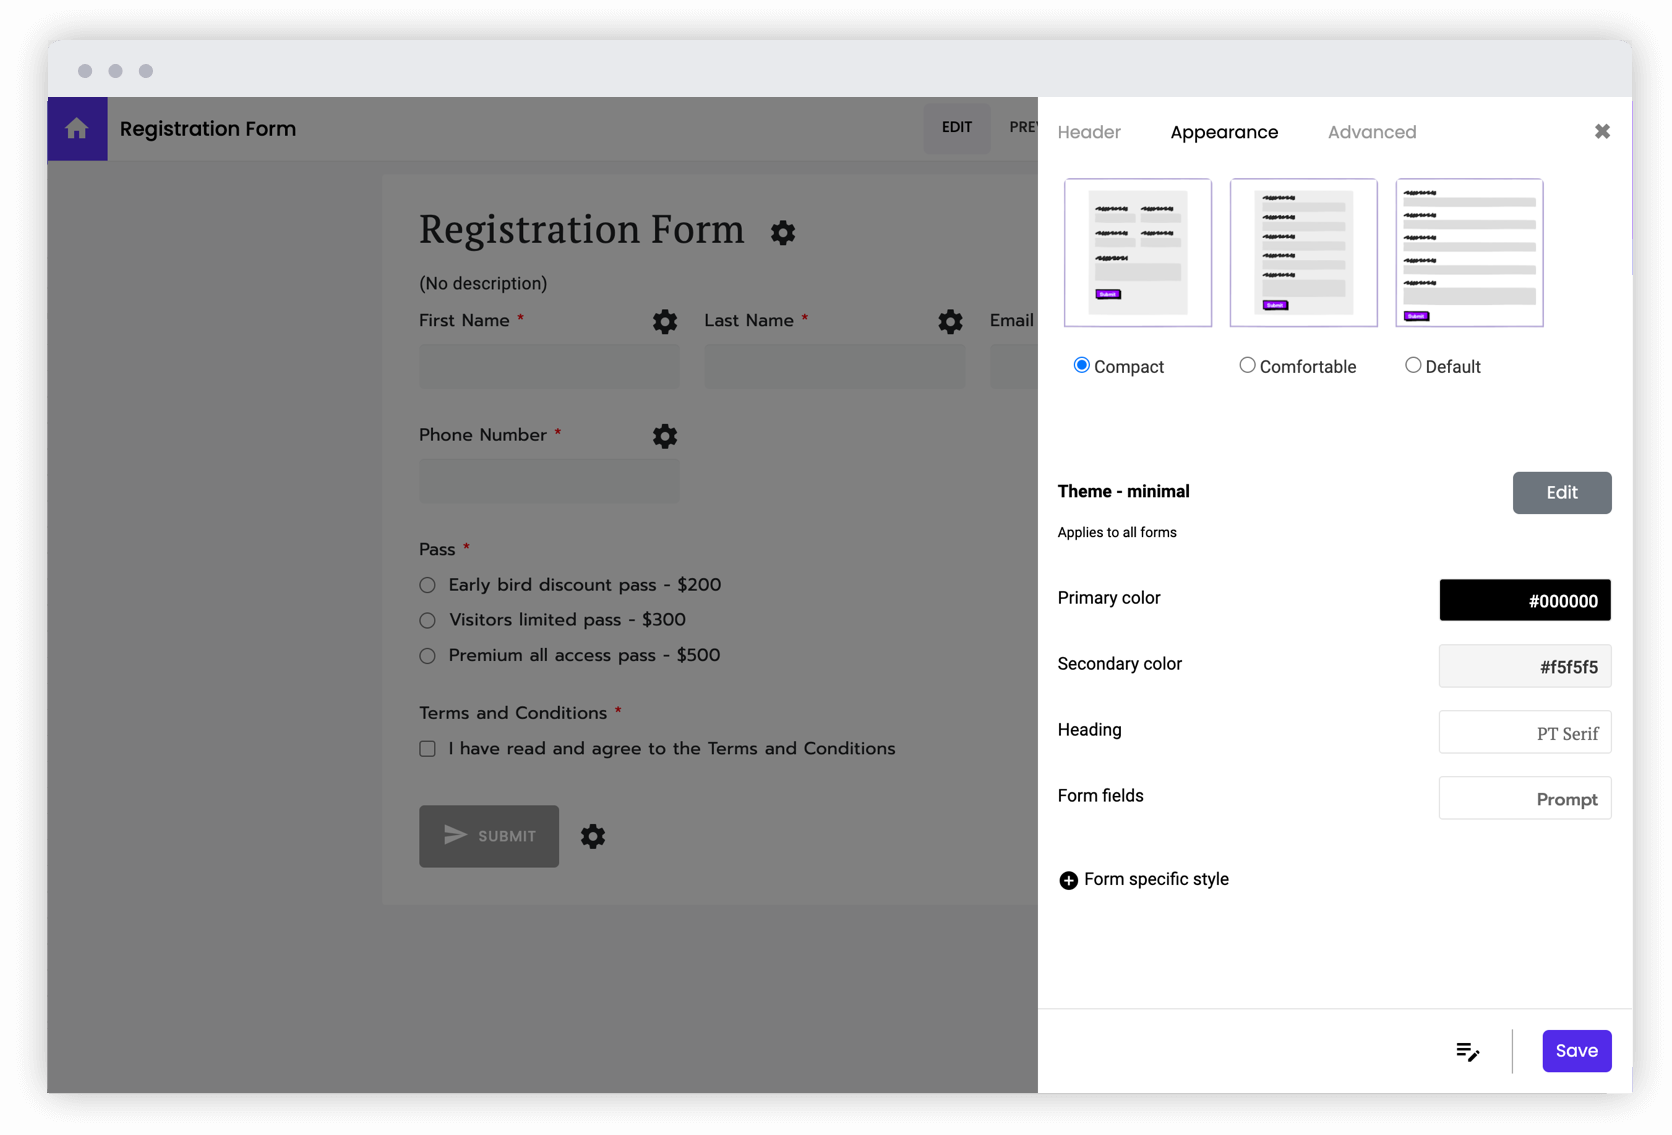 Design a professional looking form by customizing the layout, colors, fonts